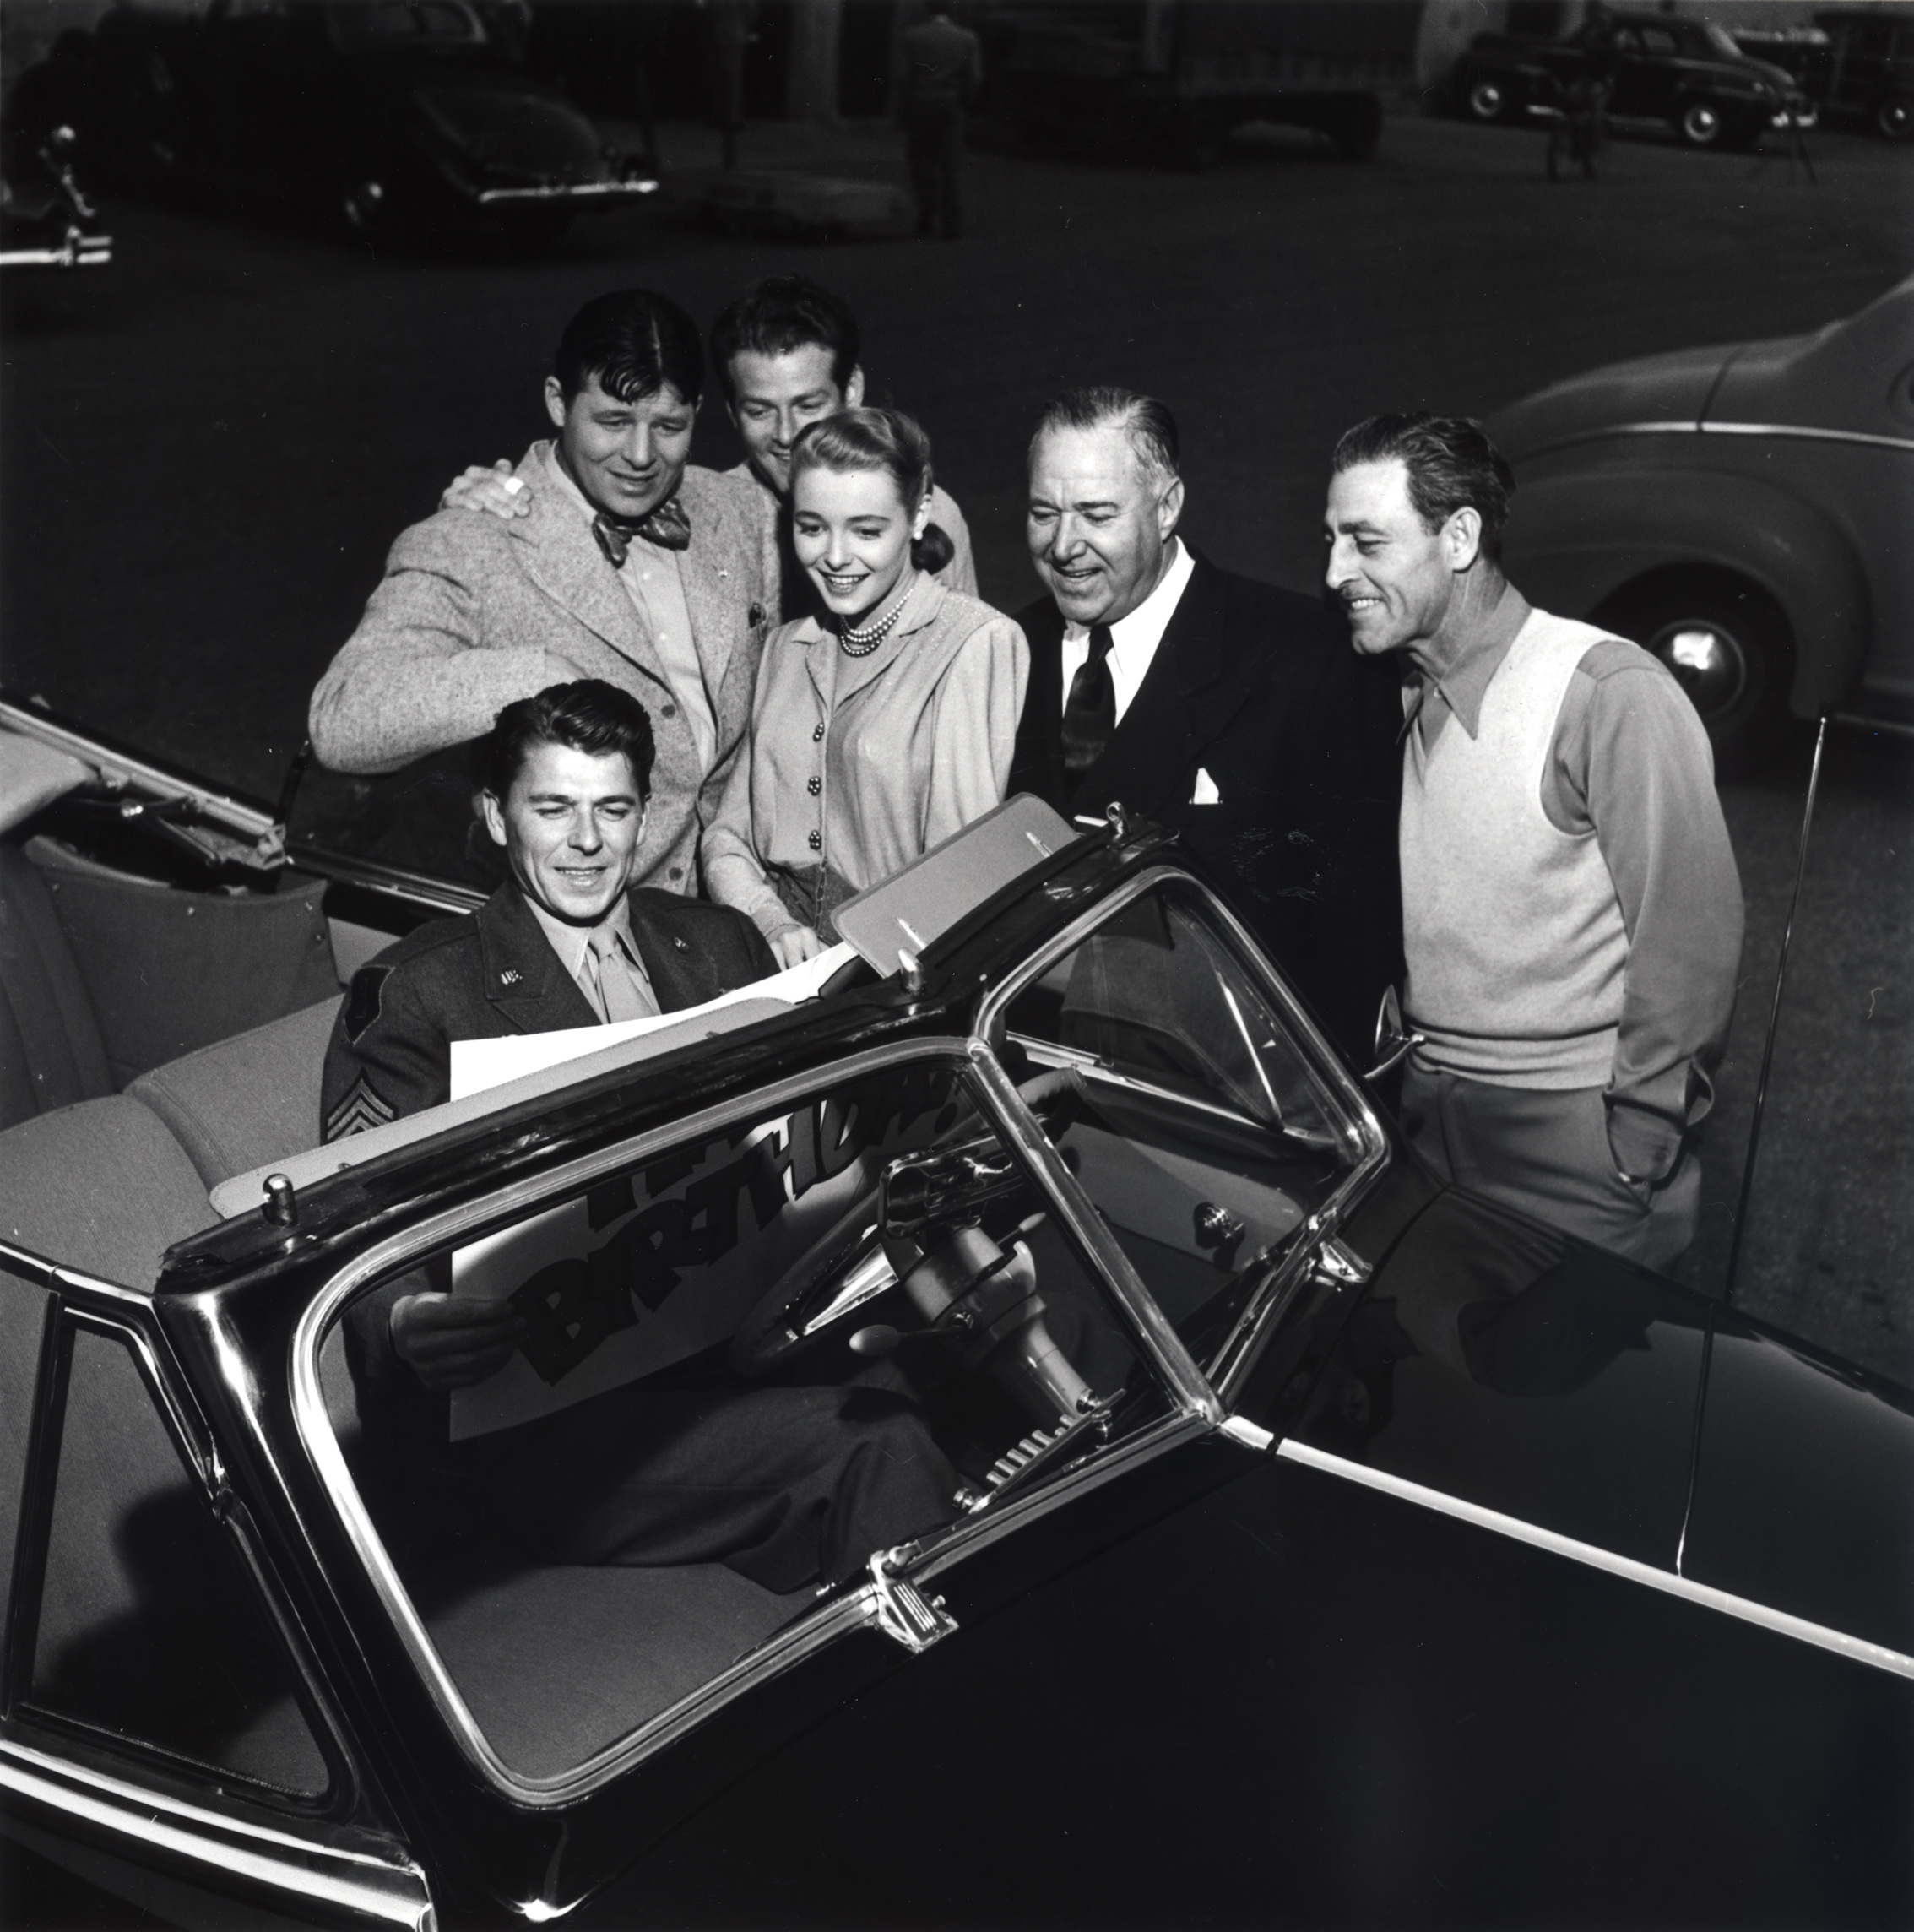 Ronald Reagan, Patricia Neal, Jack Carson, Edward Arnold and 2 unidentified men standing near Reagan who is in a car with a large birthday card